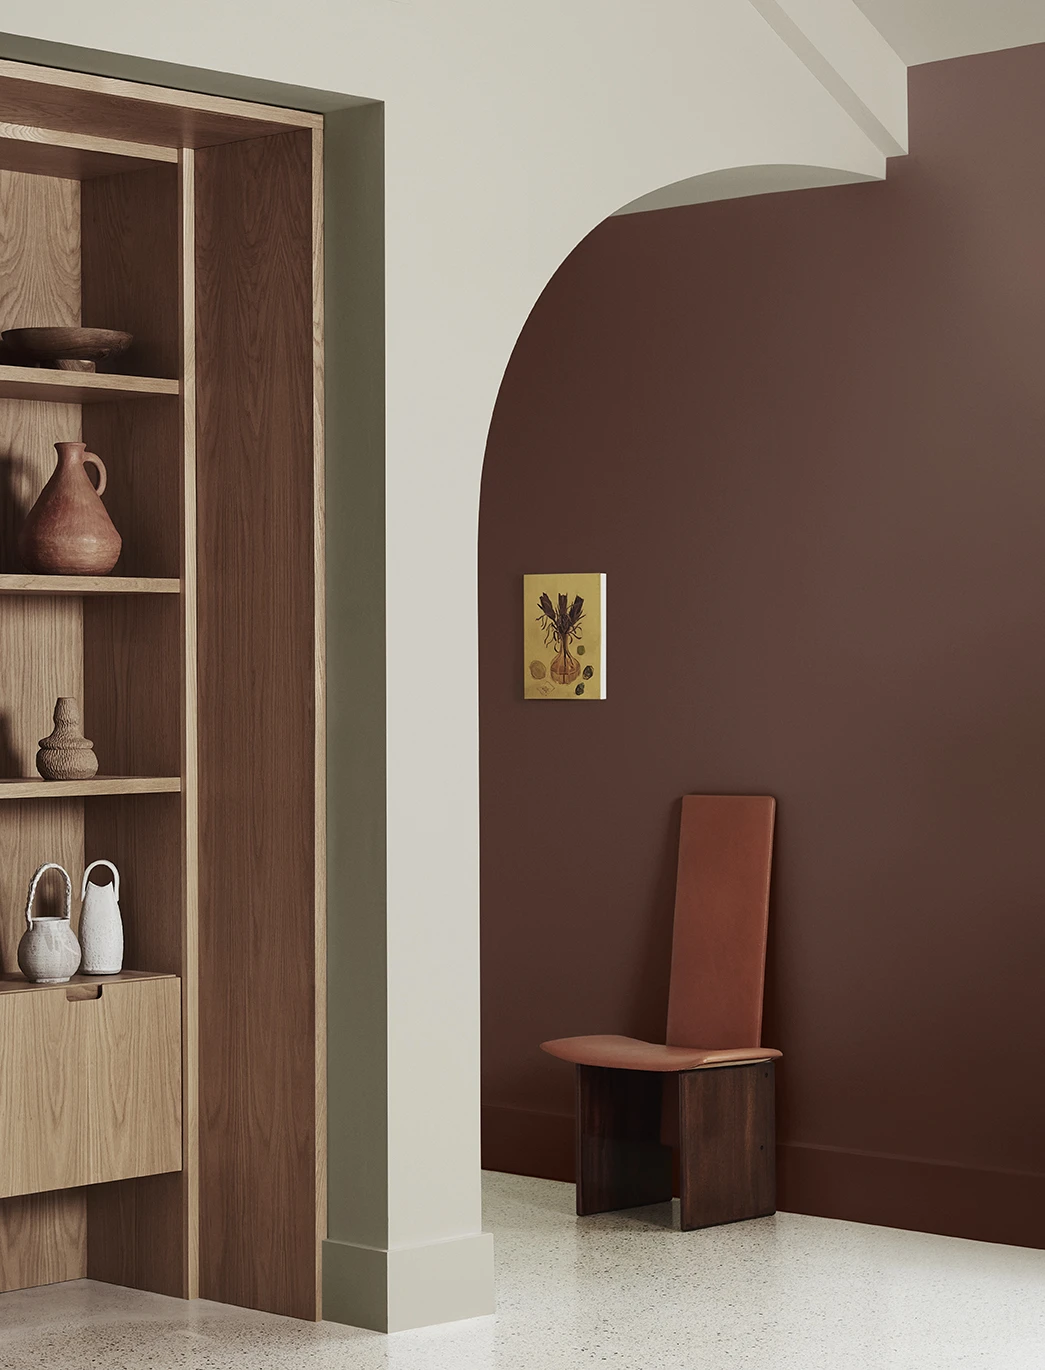 Timber bookcase alongside beige arch and brown wall